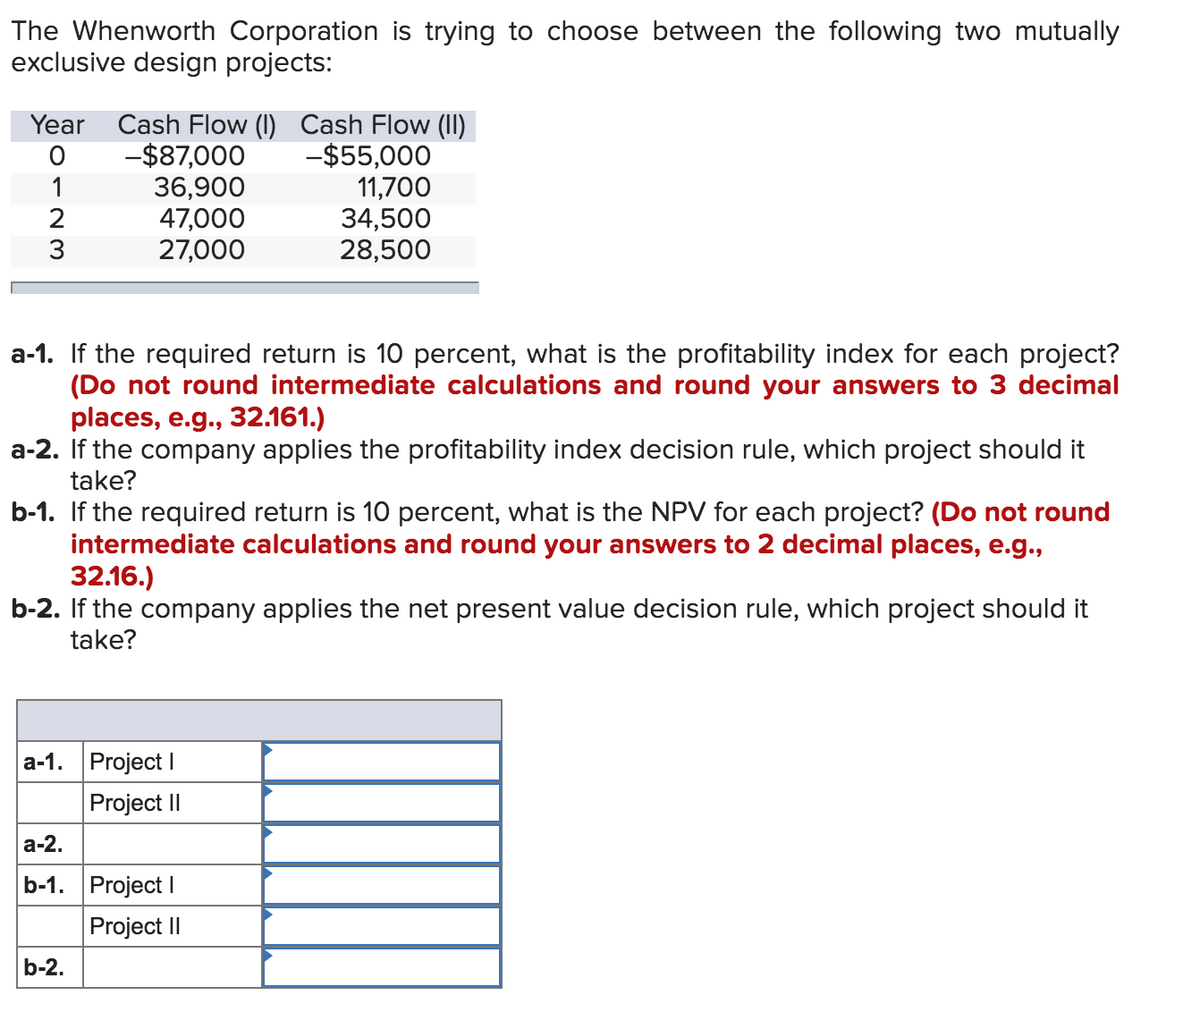 The Whenworth Corporation is trying to choose between the following two mutually
exclusive design projects:
Year Cash Flow (I) Cash Flow (II)
-$87,000
36,900
47,000
27,000
-$55,000
11,700
34,500
28,500
1
3
a-1. If the required return is 10 percent, what is the profitability index for each project?
(Do not round intermediate calculations and round your answers to 3 decimal
places, e.g., 32.161.)
a-2. If the company applies the profitability index decision rule, which project should it
take?
b-1. If the required return is 10 percent, what is the NPV for each project? (Do not round
intermediate calculations and round your answers to 2 decimal places, e.g.,
32.16.)
b-2. If the company applies the net present value decision rule, which project should it
take?
a-1. Project I
Project II
а-2.
b-1. Project I
Project II
b-2.
